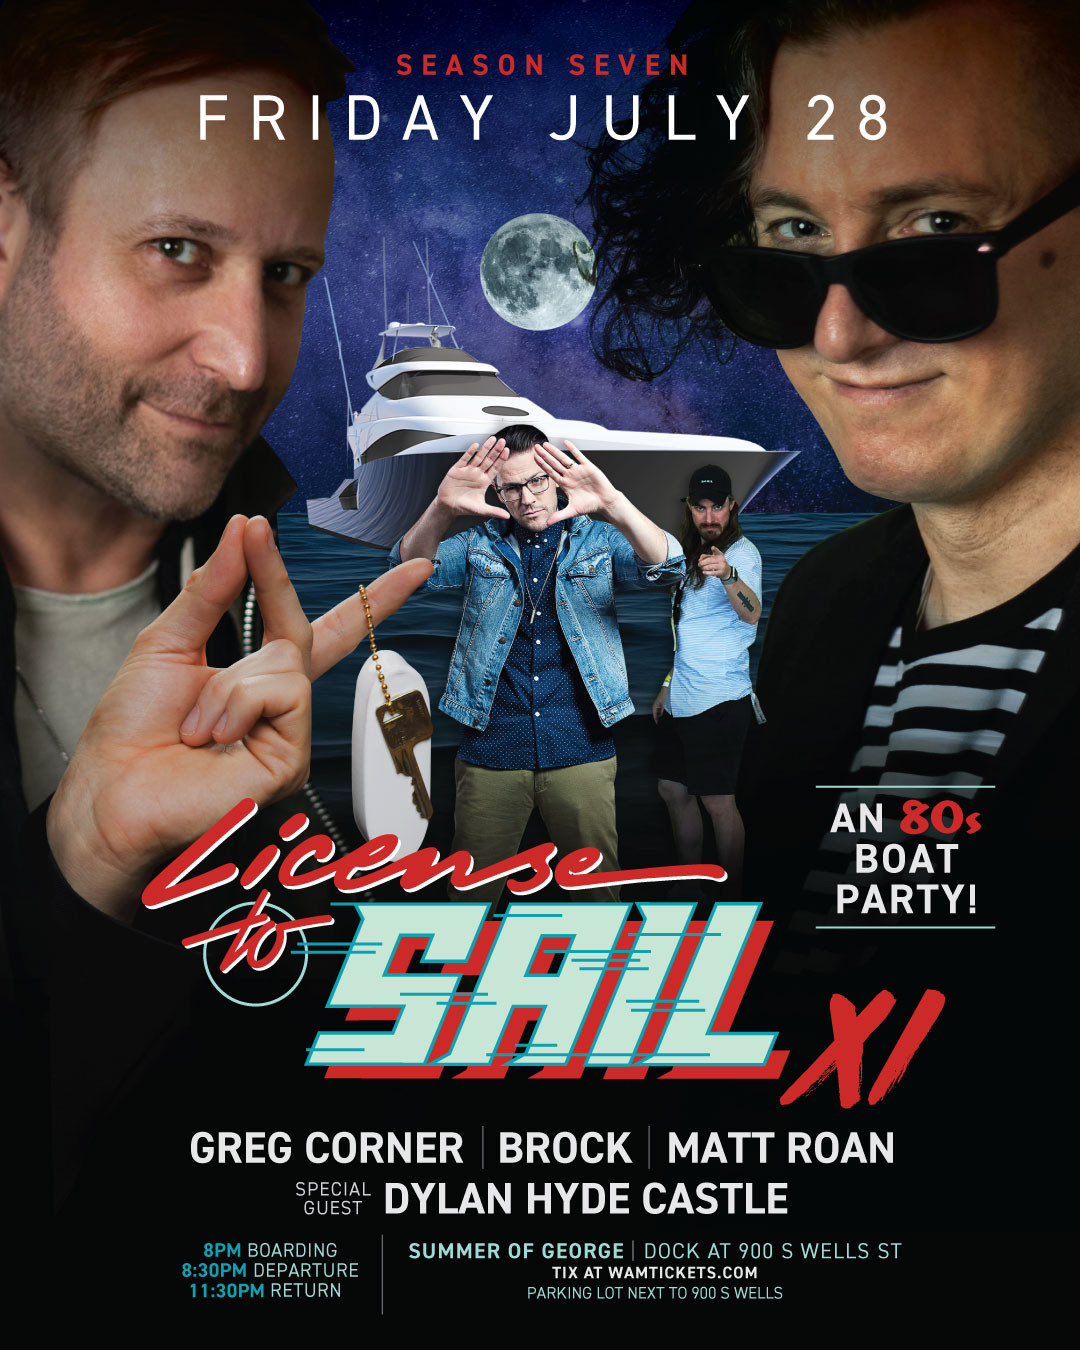 License to Sail - 80's Boat Party - WAMI Tickets